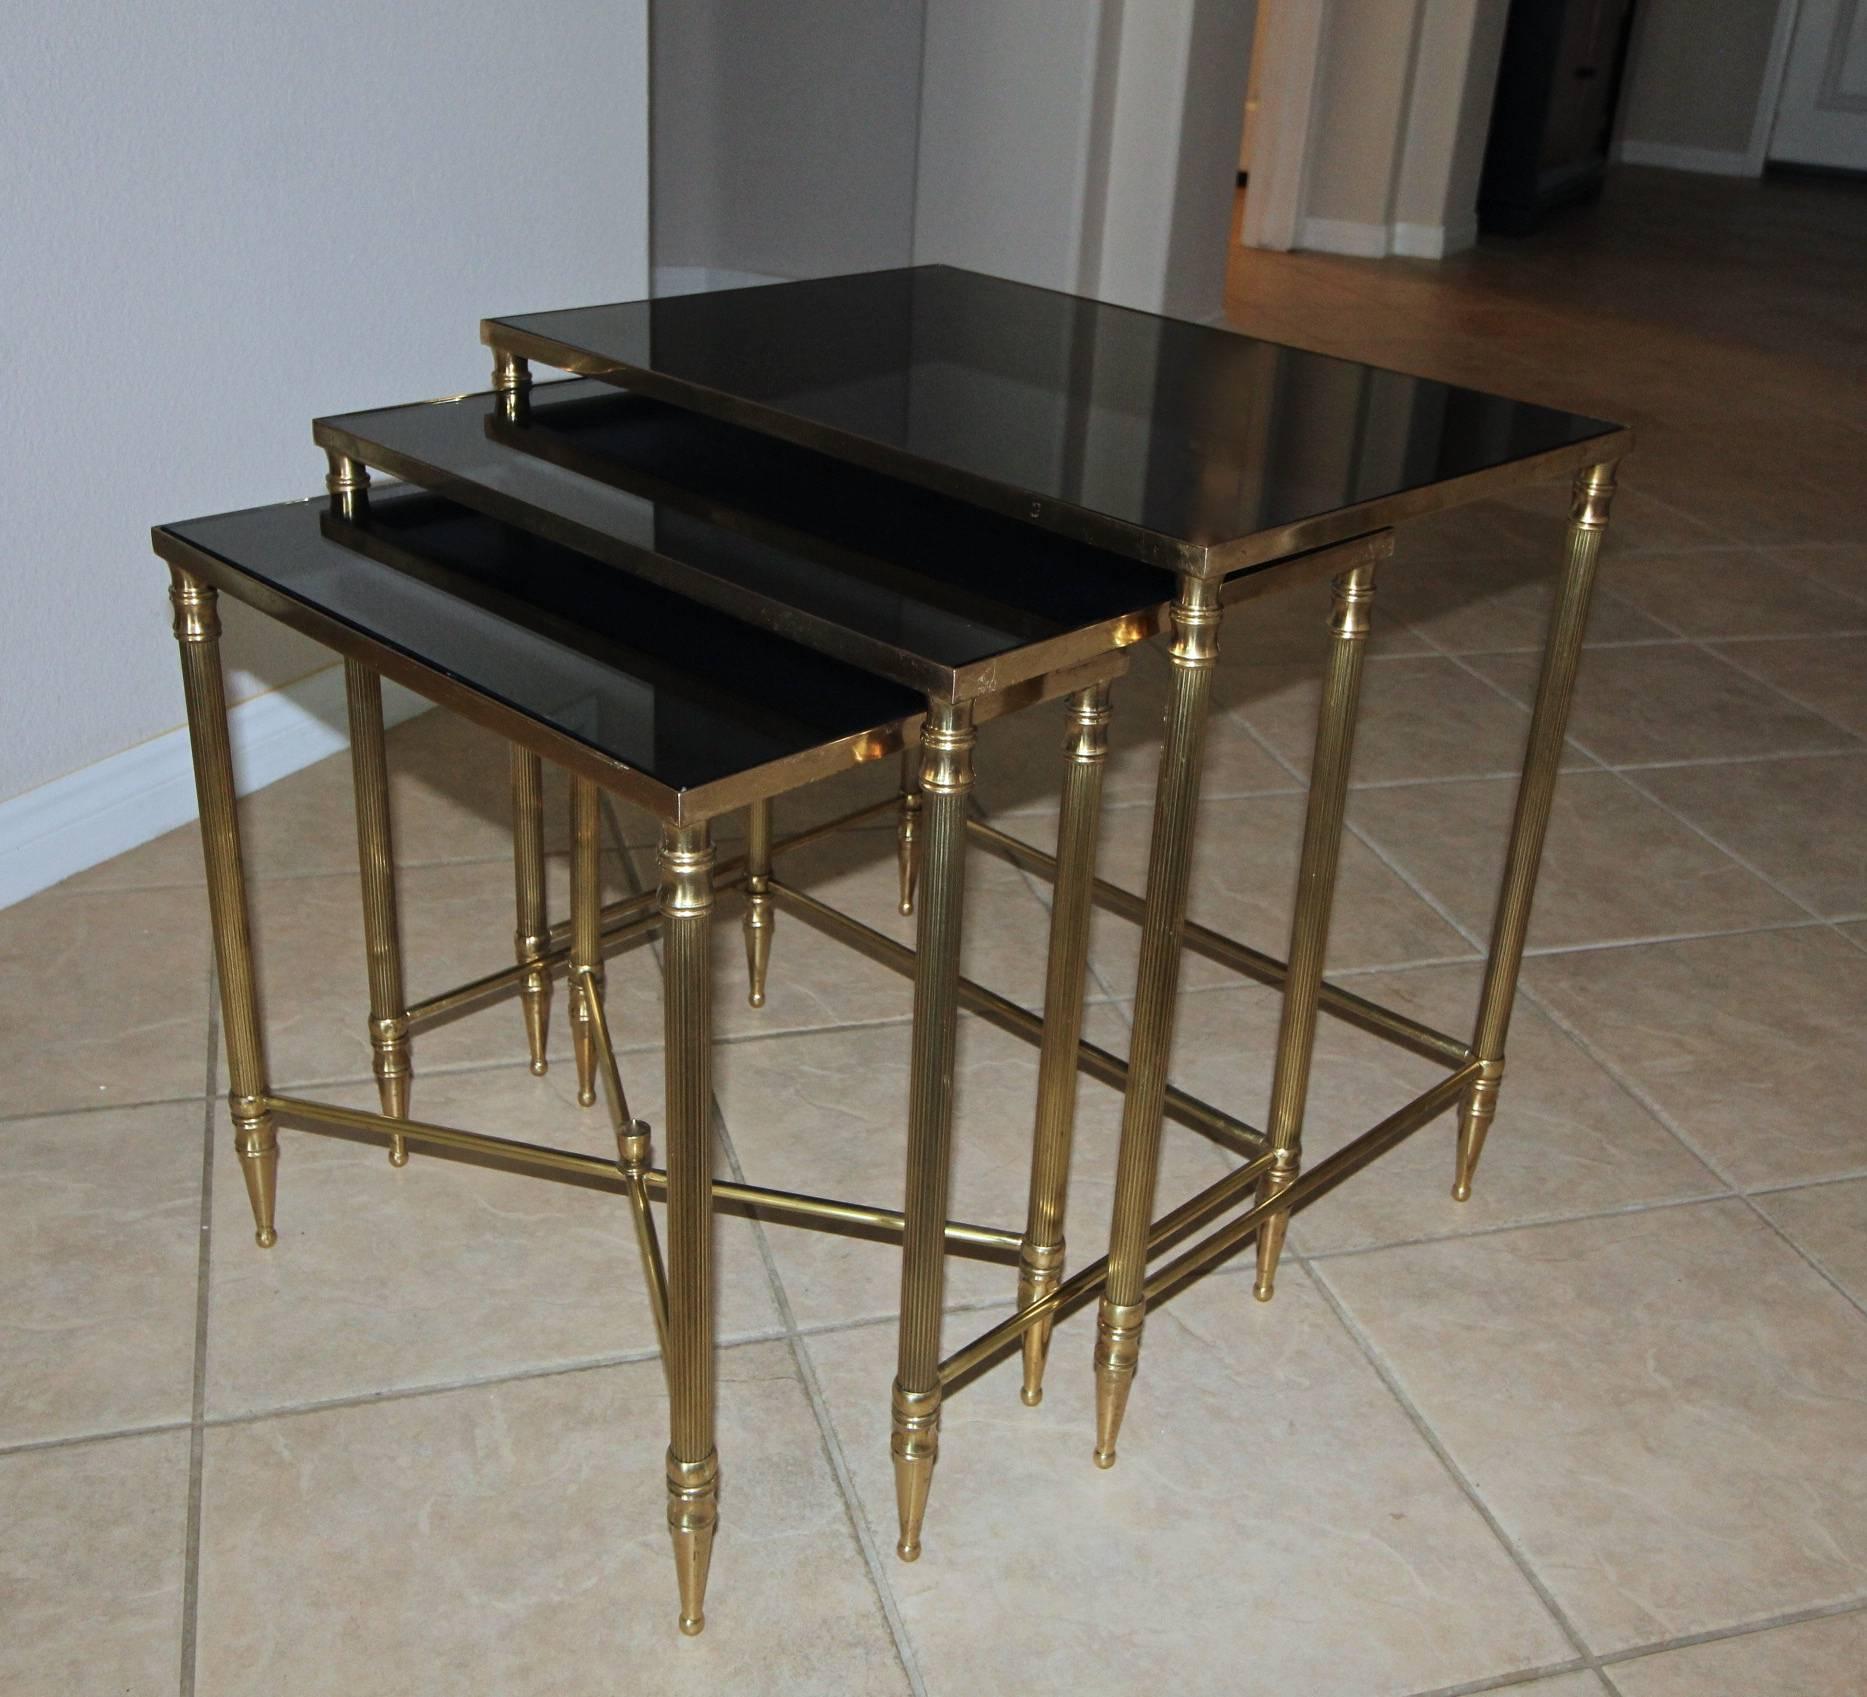 Trio of French brass nesting tables with newer dark graphite color mirrored glass inset tops.
Measures: Table #1 - 22